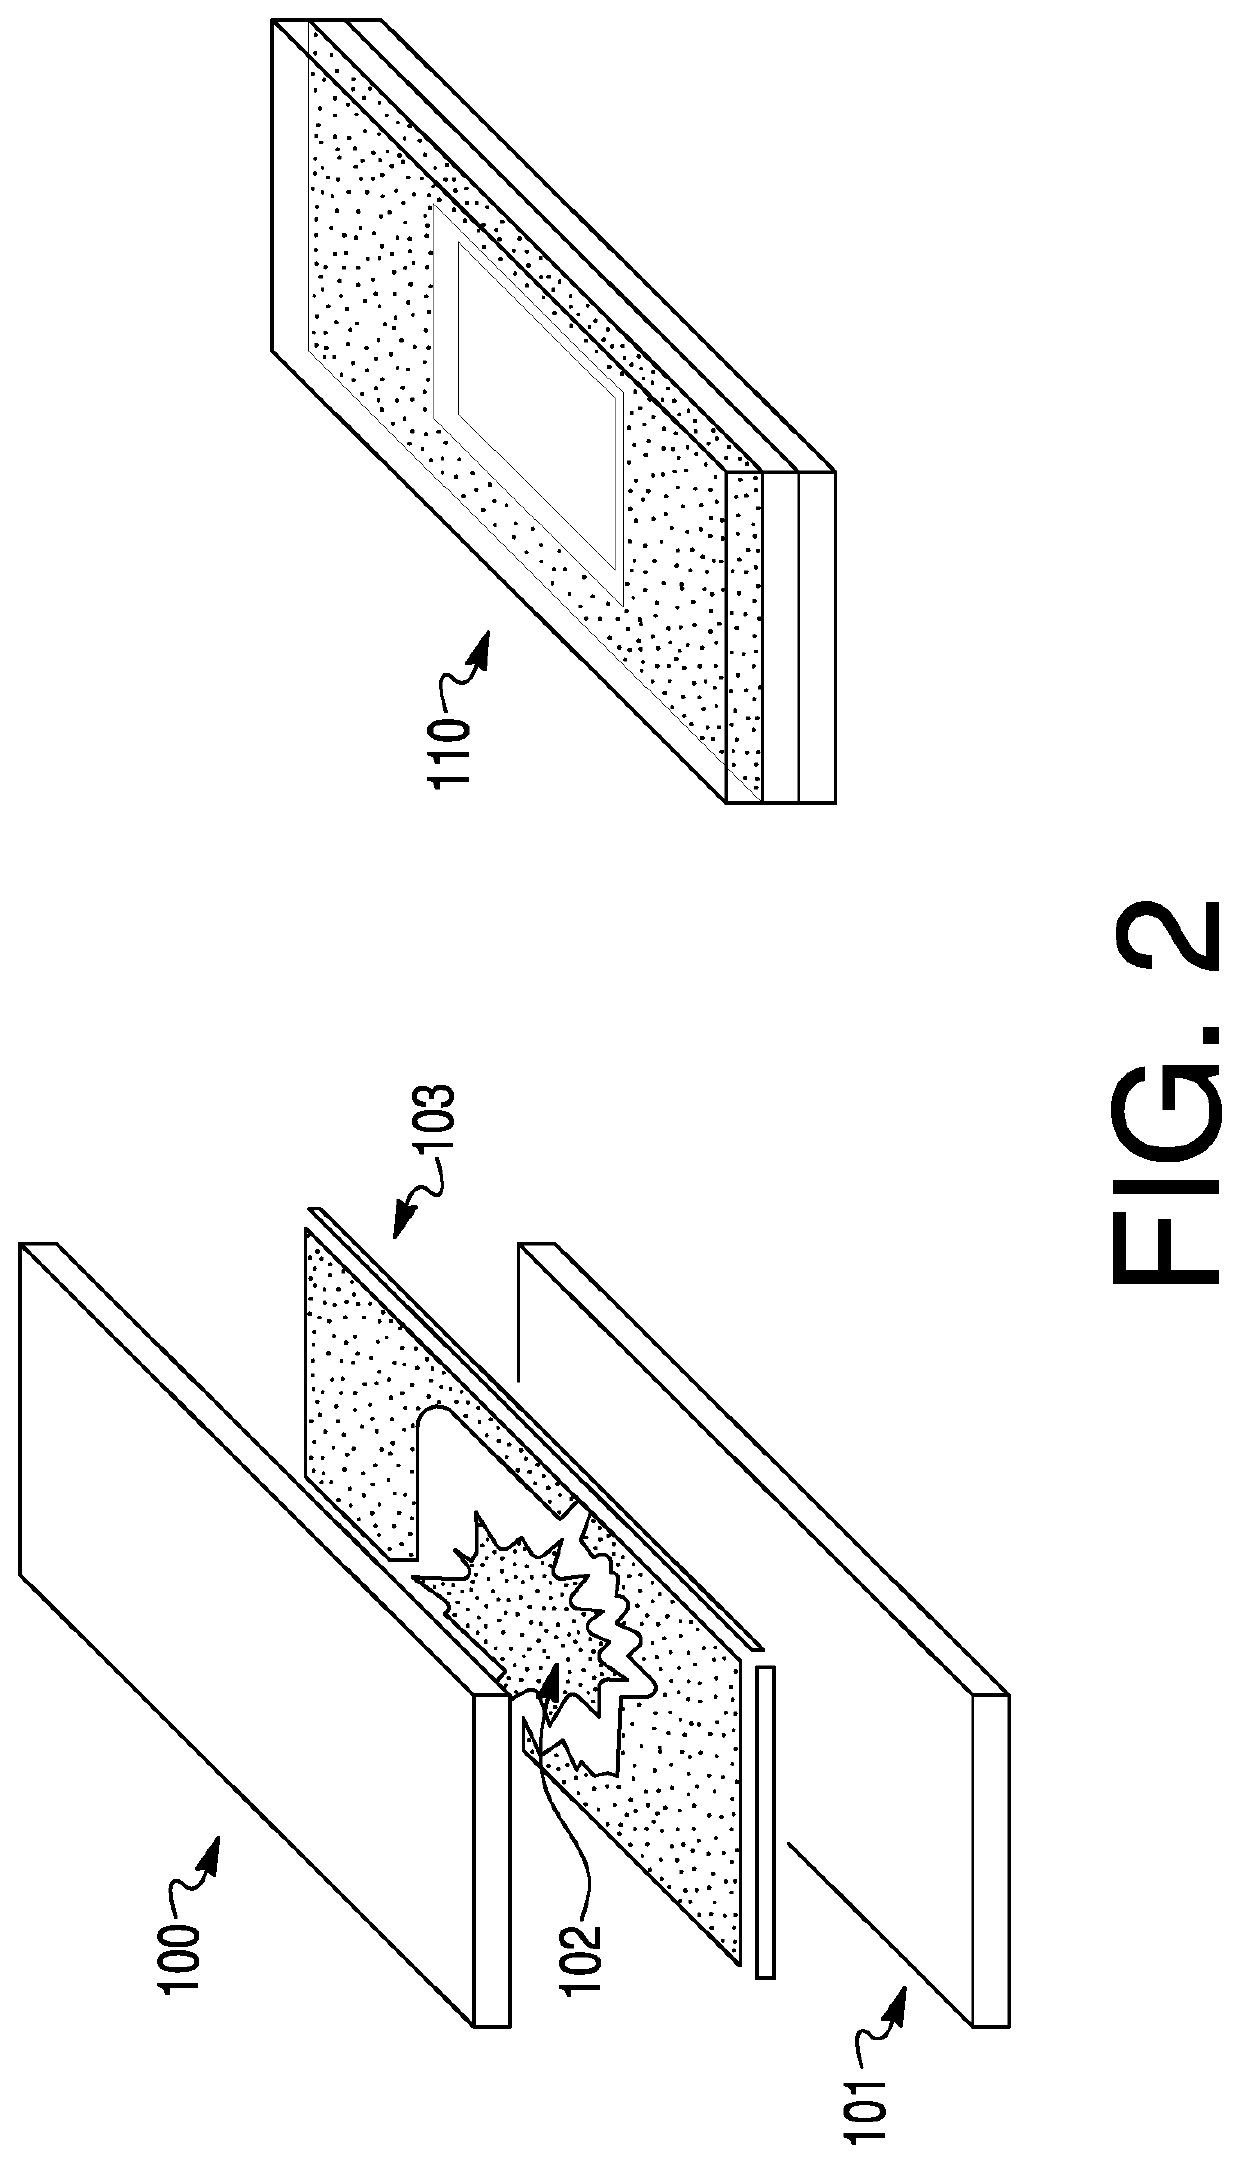 Methods for determining photosensitive properties of a material